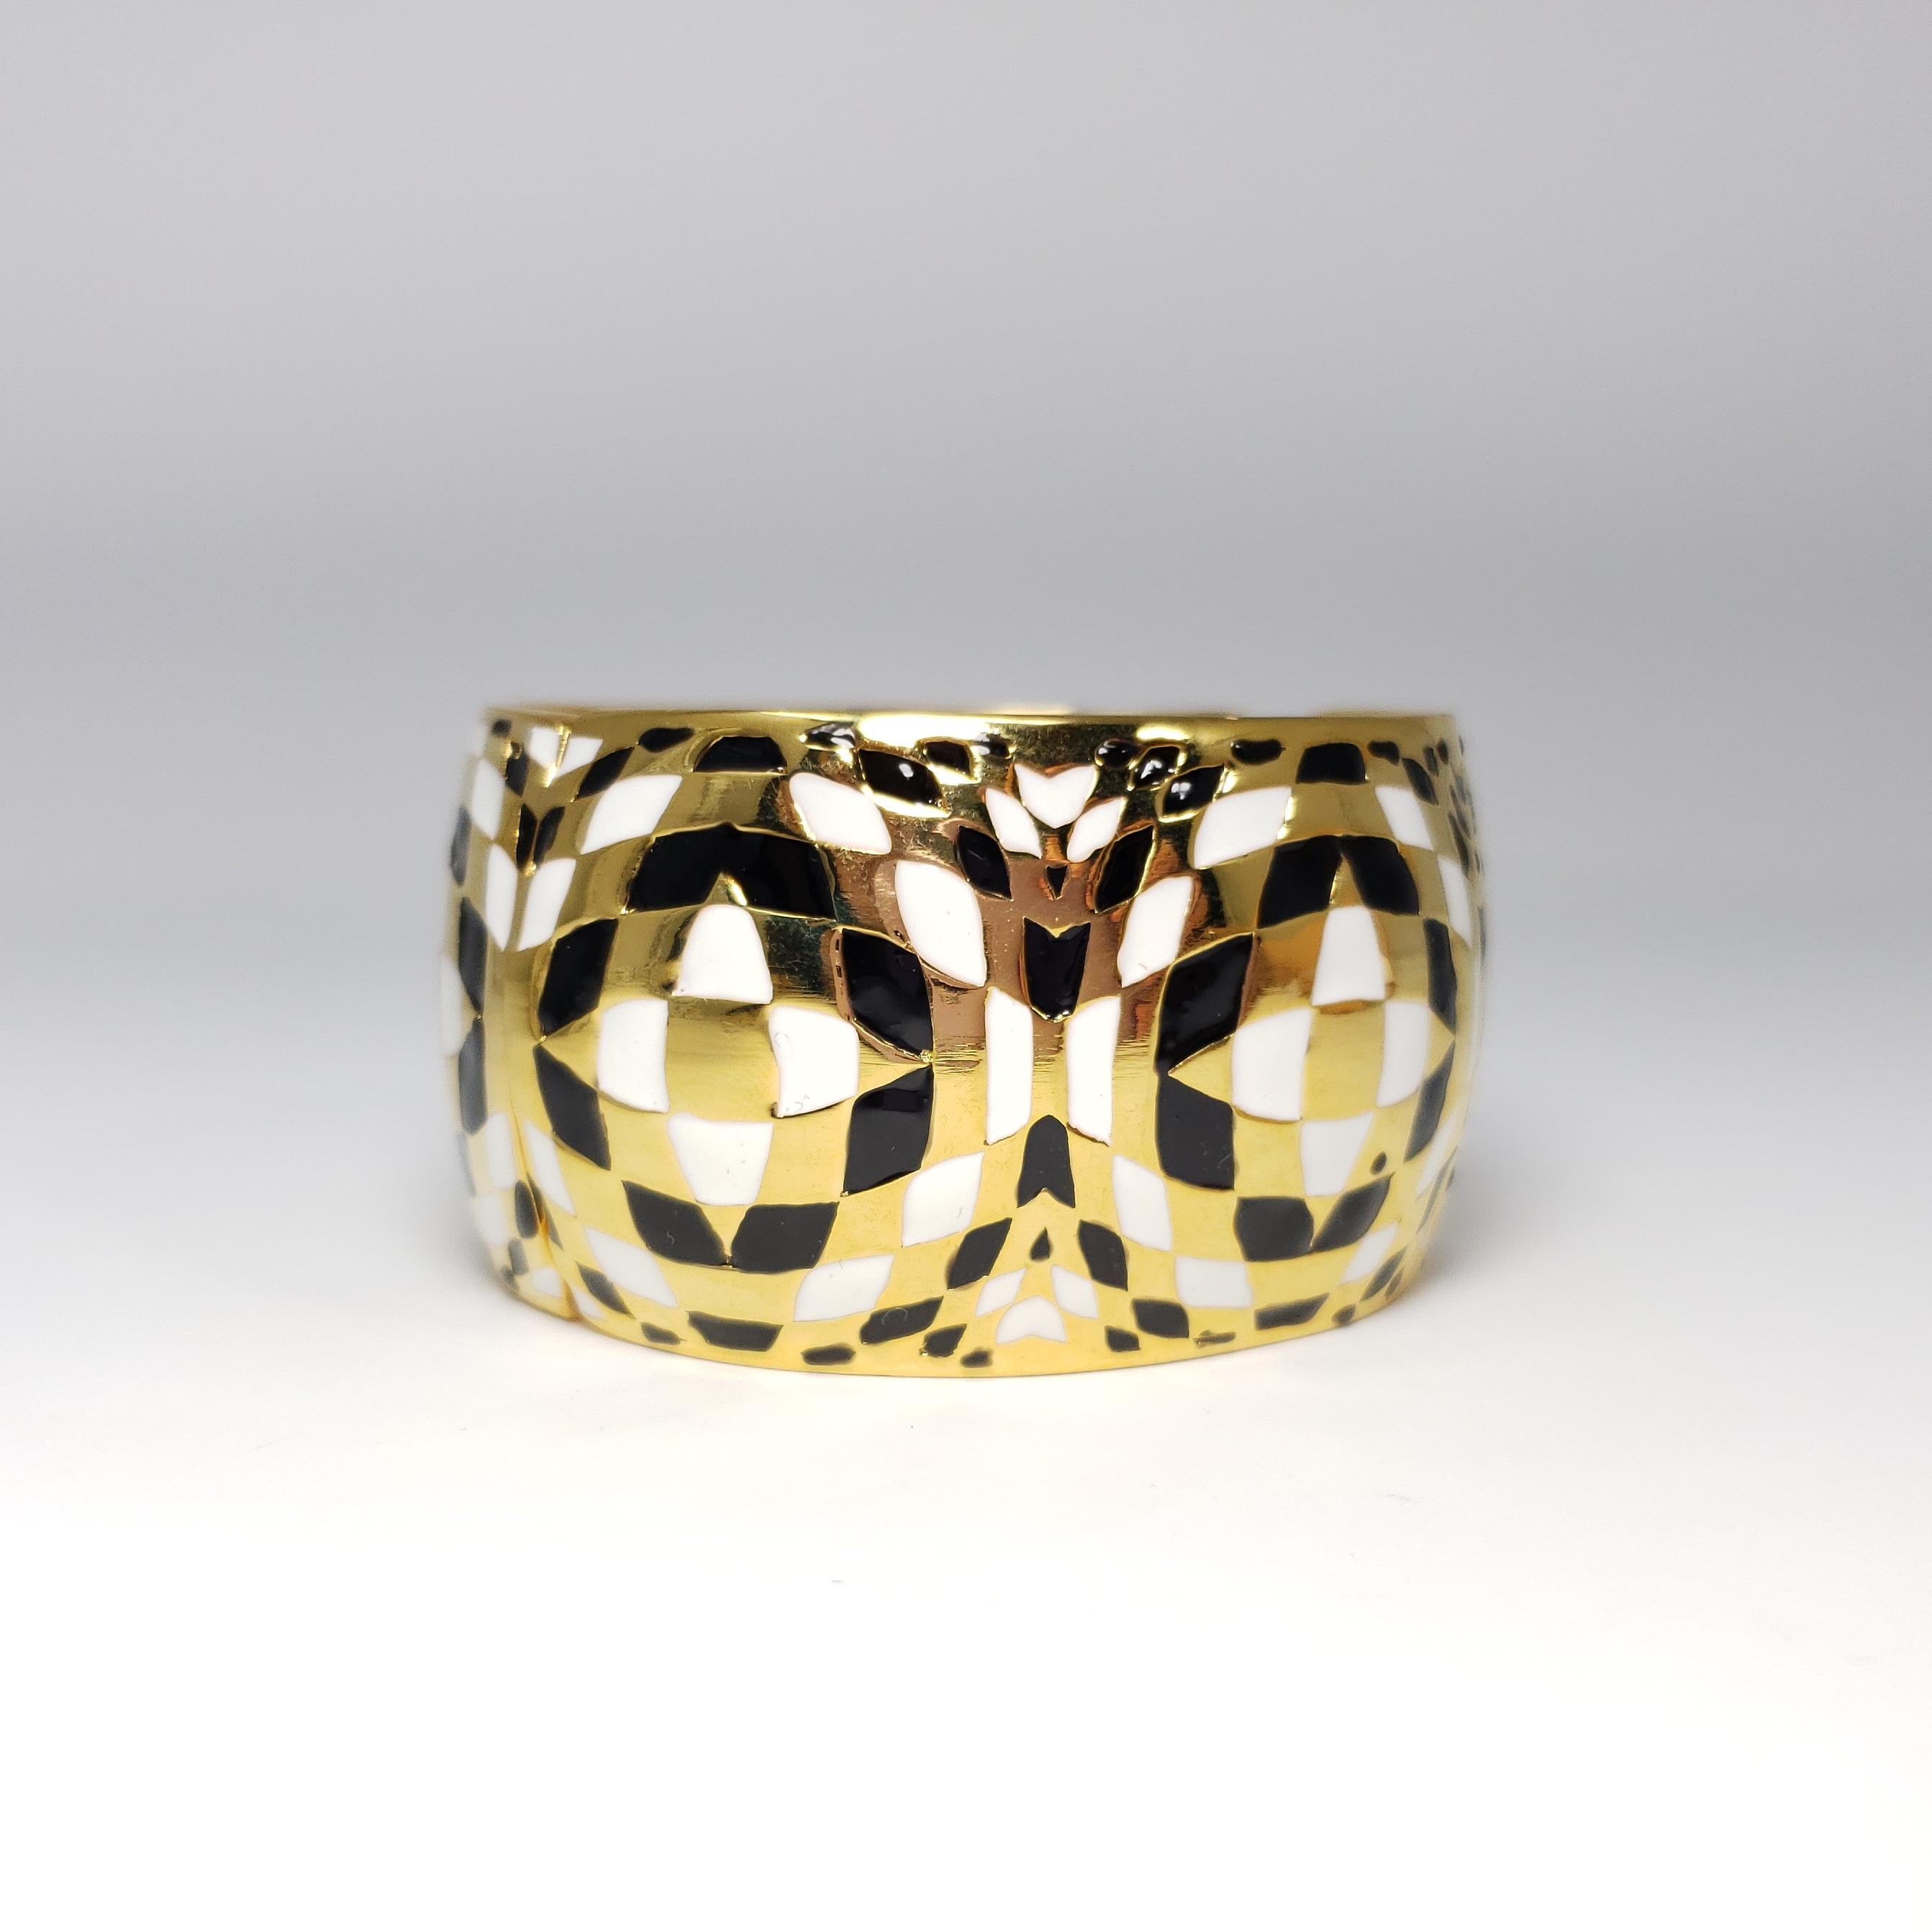 A bracelet by Kenneth Jay Lane in an exotic leopard pattern. Features raised gold-plated motifs accented with colorful crystals.

Height: 3.6 cm / 1.4 in
Diameter at widest part: 5.9 cm/ 2.34 in
Inner circumference: 17.8 cm / 7 in 

Hallmarks: